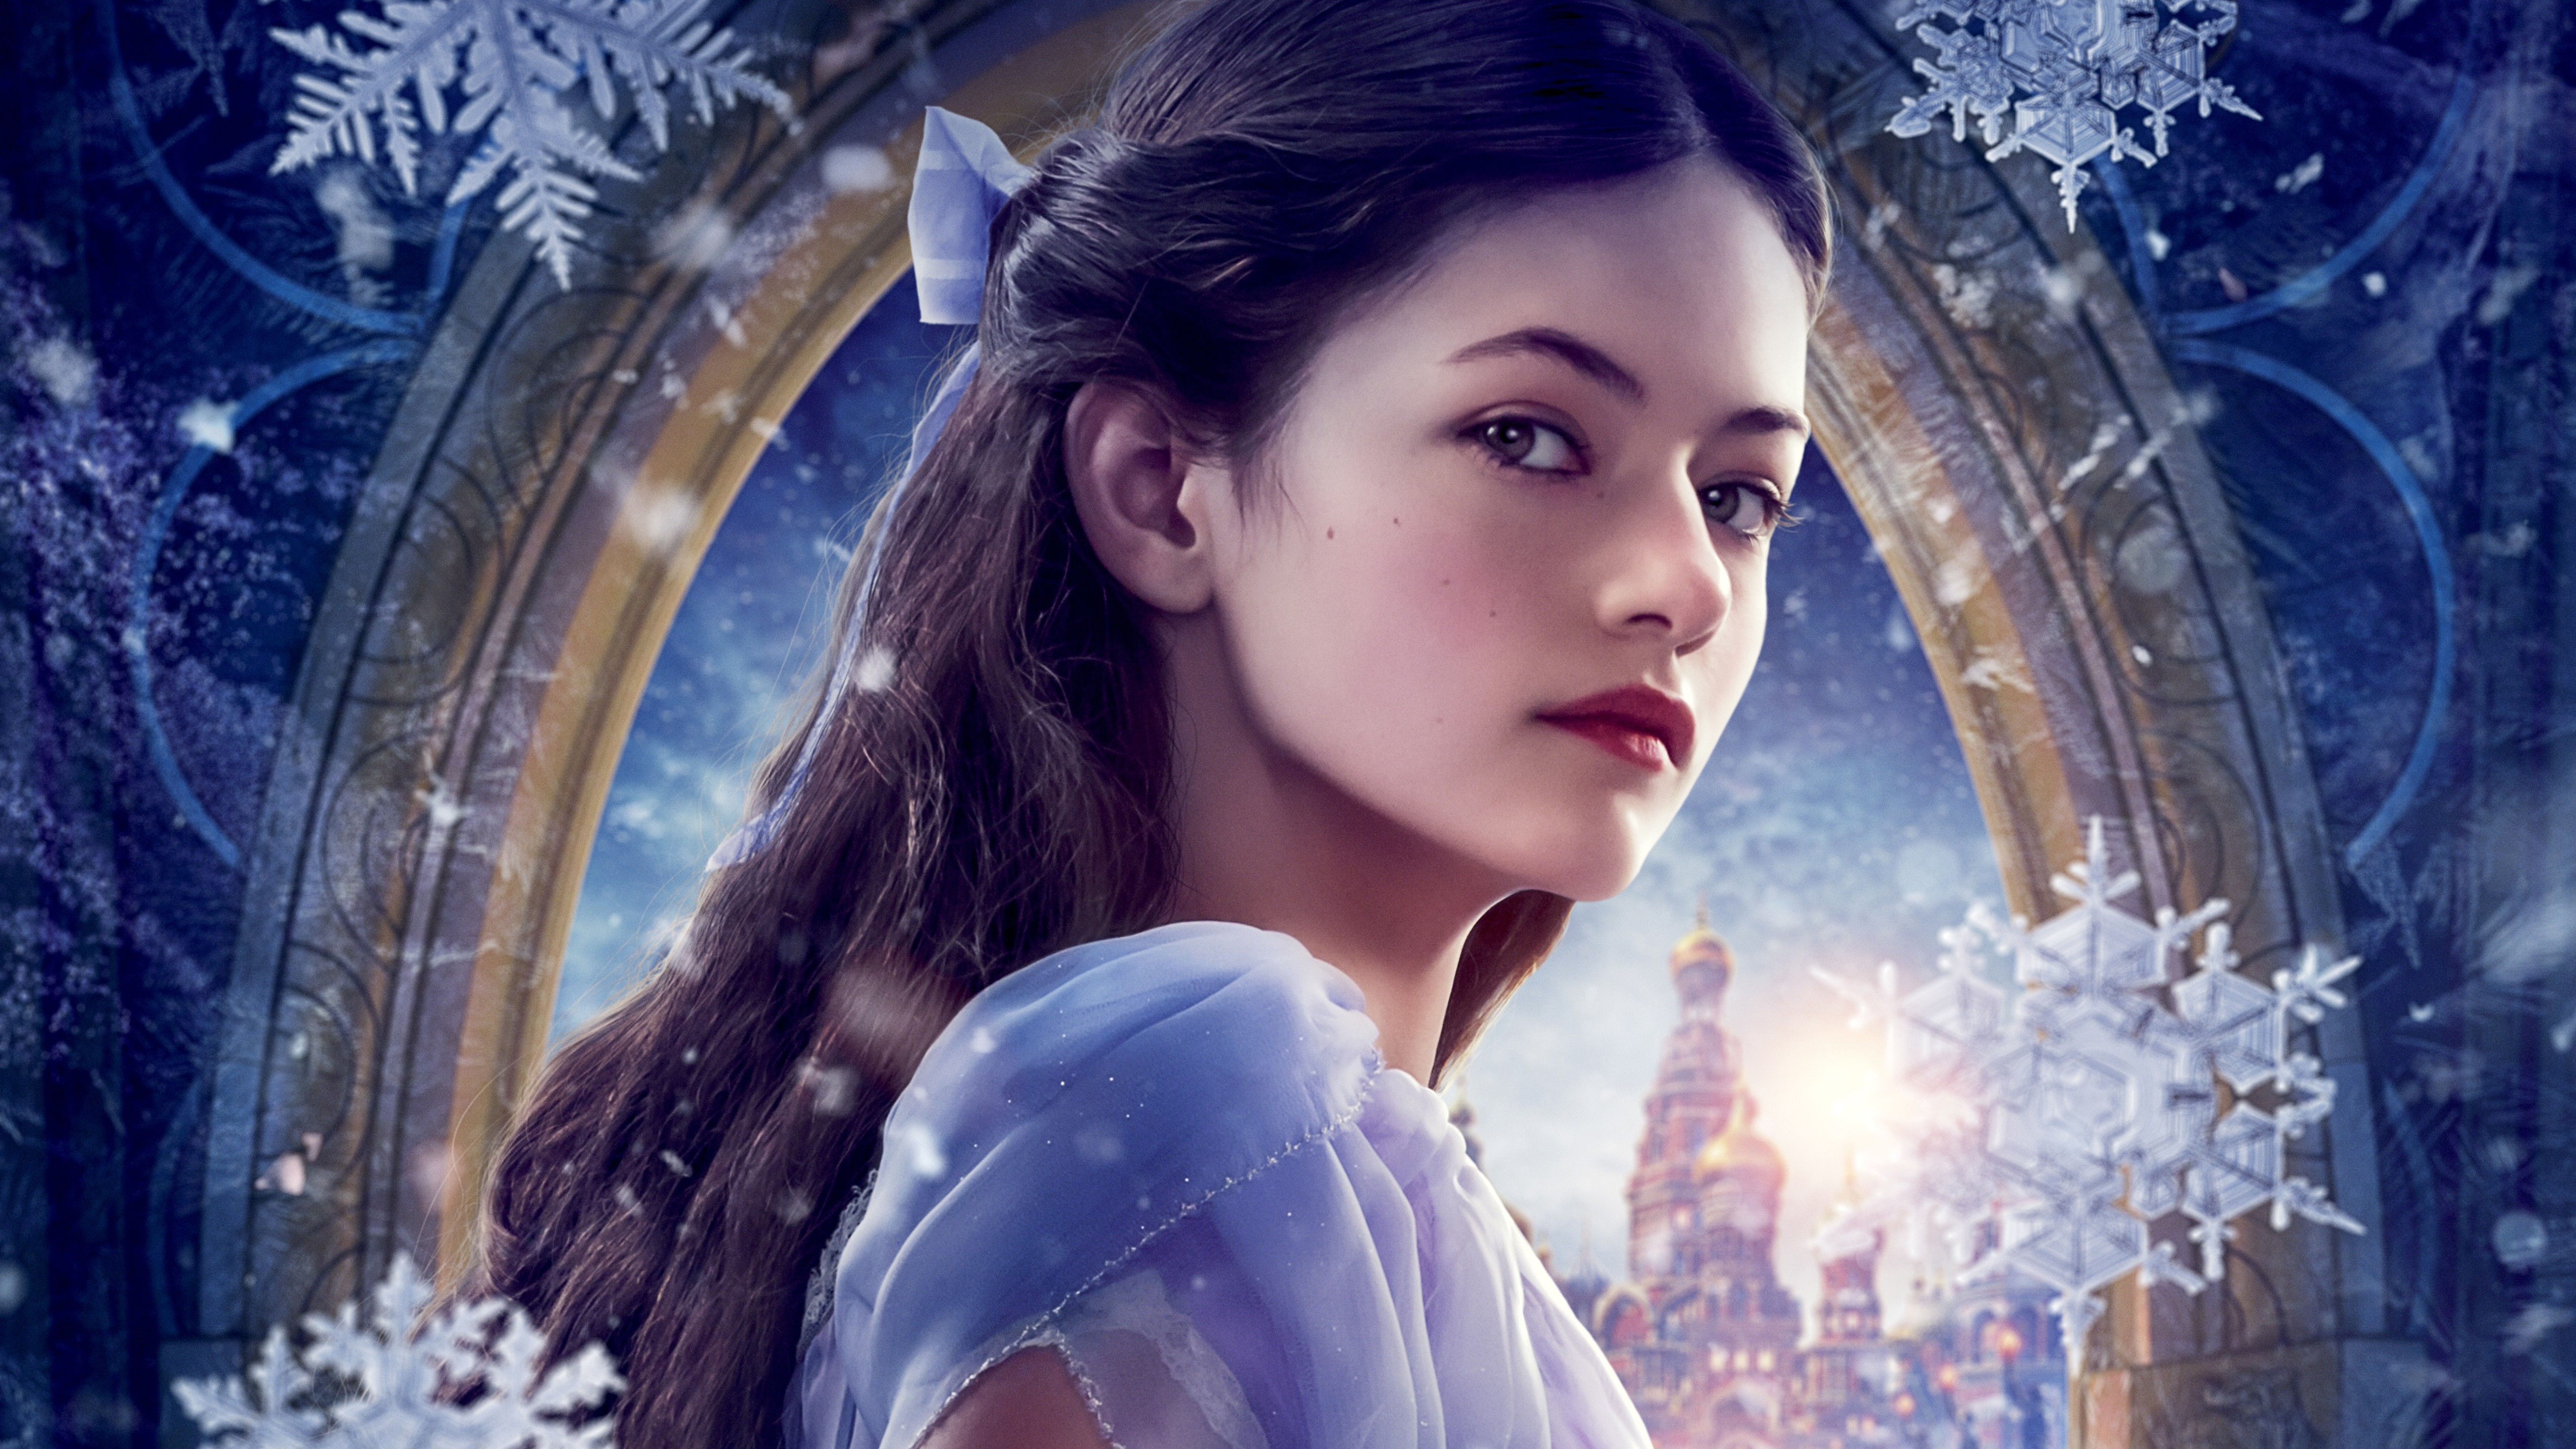 The Nutcracker and the Four Realms 4k Ultra HD Wallpaper